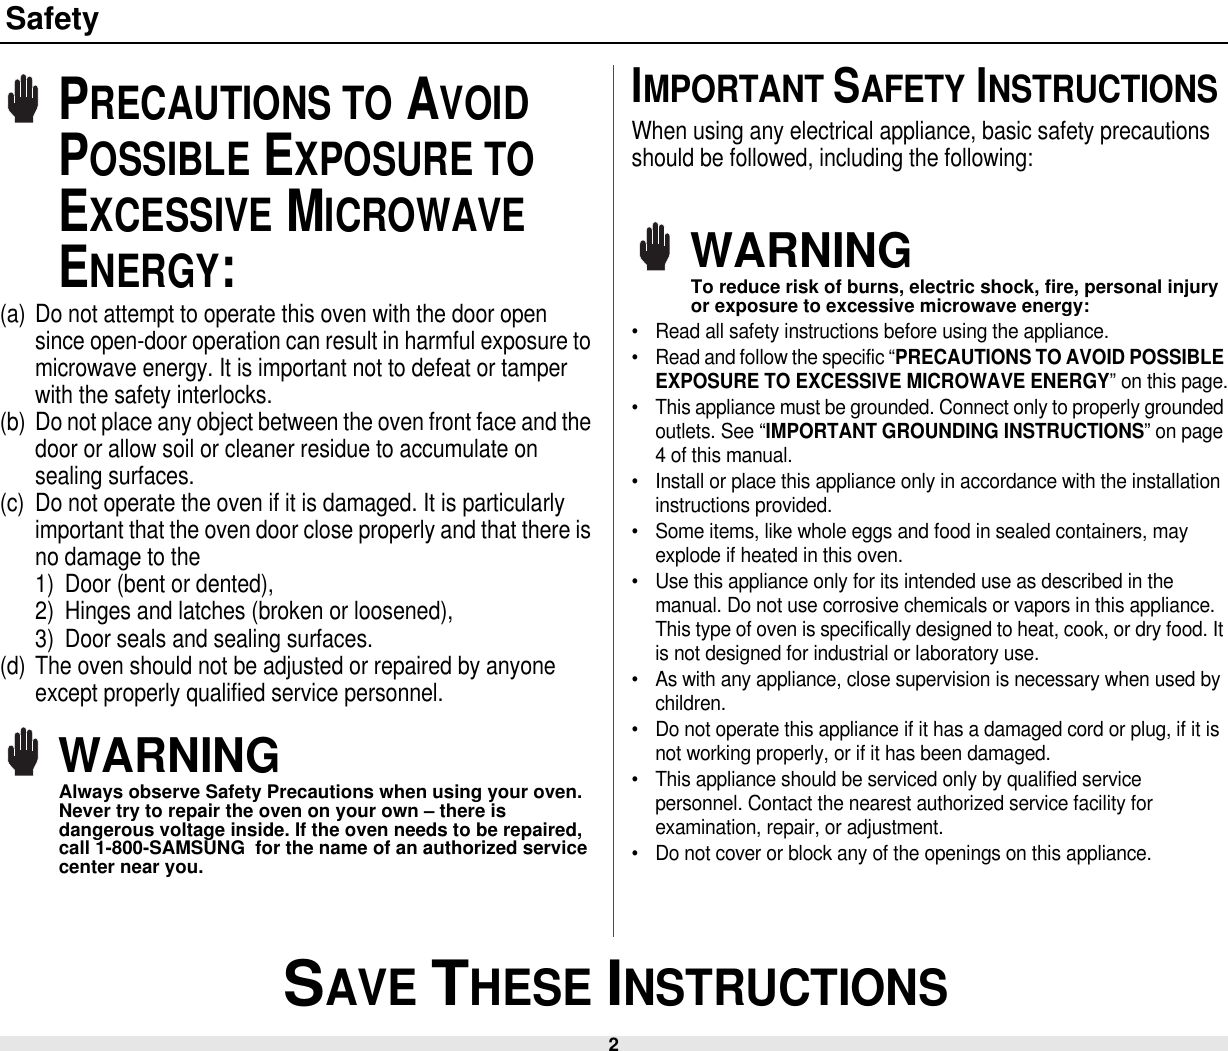 2 SAVE THESE INSTRUCTIONSSafetyPRECAUTIONS TO AVOID POSSIBLE EXPOSURE TO EXCESSIVE MICROWAVE ENERGY:(a) Do not attempt to operate this oven with the door open since open-door operation can result in harmful exposure to microwave energy. It is important not to defeat or tamper with the safety interlocks.(b) Do not place any object between the oven front face and the door or allow soil or cleaner residue to accumulate on sealing surfaces.(c) Do not operate the oven if it is damaged. It is particularly important that the oven door close properly and that there is no damage to the 1) Door (bent or dented), 2) Hinges and latches (broken or loosened), 3) Door seals and sealing surfaces.(d) The oven should not be adjusted or repaired by anyone except properly qualified service personnel.WARNINGAlways observe Safety Precautions when using your oven. Never try to repair the oven on your own – there is dangerous voltage inside. If the oven needs to be repaired, call 1-800-SAMSUNG  for the name of an authorized service center near you.IMPORTANT SAFETY INSTRUCTIONSWhen using any electrical appliance, basic safety precautions should be followed, including the following:WARNINGTo reduce risk of burns, electric shock, fire, personal injury or exposure to excessive microwave energy:• Read all safety instructions before using the appliance.• Read and follow the specific “PRECAUTIONS TO AVOID POSSIBLE EXPOSURE TO EXCESSIVE MICROWAVE ENERGY” on this page.• This appliance must be grounded. Connect only to properly grounded outlets. See “IMPORTANT GROUNDING INSTRUCTIONS” on page 4 of this manual. • Install or place this appliance only in accordance with the installation instructions provided.• Some items, like whole eggs and food in sealed containers, may explode if heated in this oven.• Use this appliance only for its intended use as described in the manual. Do not use corrosive chemicals or vapors in this appliance. This type of oven is specifically designed to heat, cook, or dry food. It is not designed for industrial or laboratory use.• As with any appliance, close supervision is necessary when used by children.• Do not operate this appliance if it has a damaged cord or plug, if it is not working properly, or if it has been damaged.• This appliance should be serviced only by qualified service personnel. Contact the nearest authorized service facility for examination, repair, or adjustment.• Do not cover or block any of the openings on this appliance.